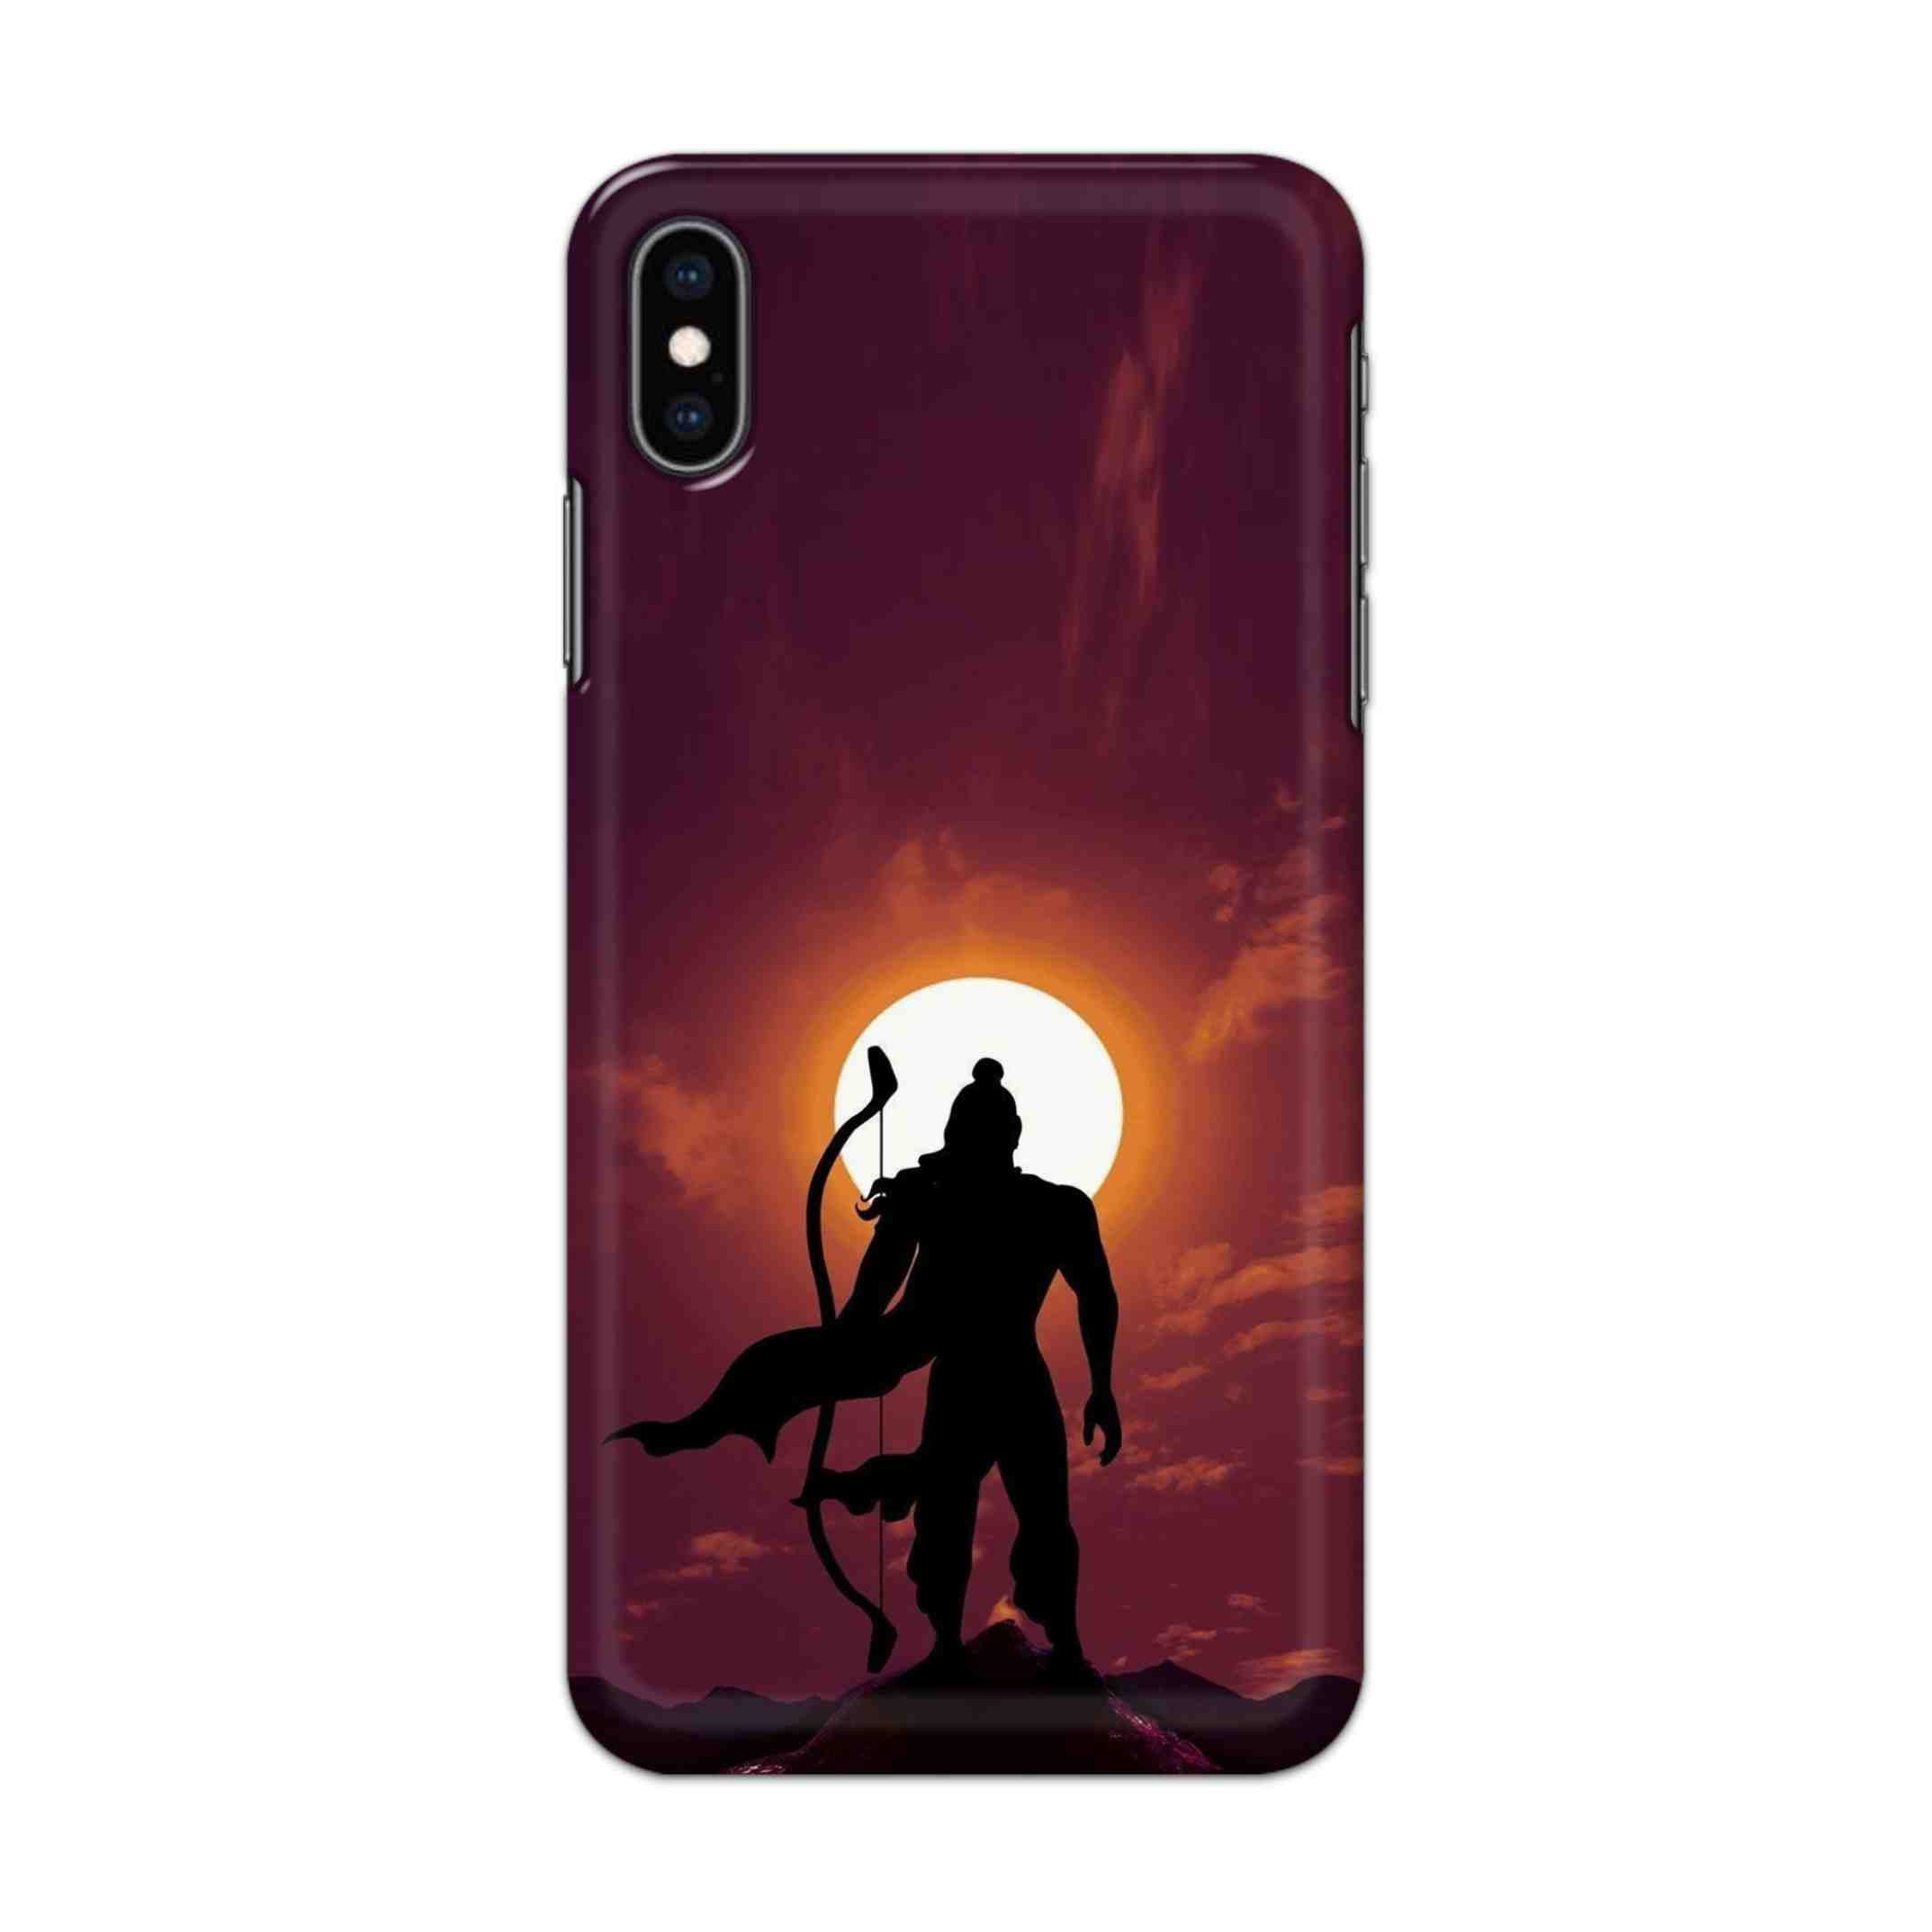 Buy Ram Hard Back Mobile Phone Case/Cover For iPhone XS MAX Online